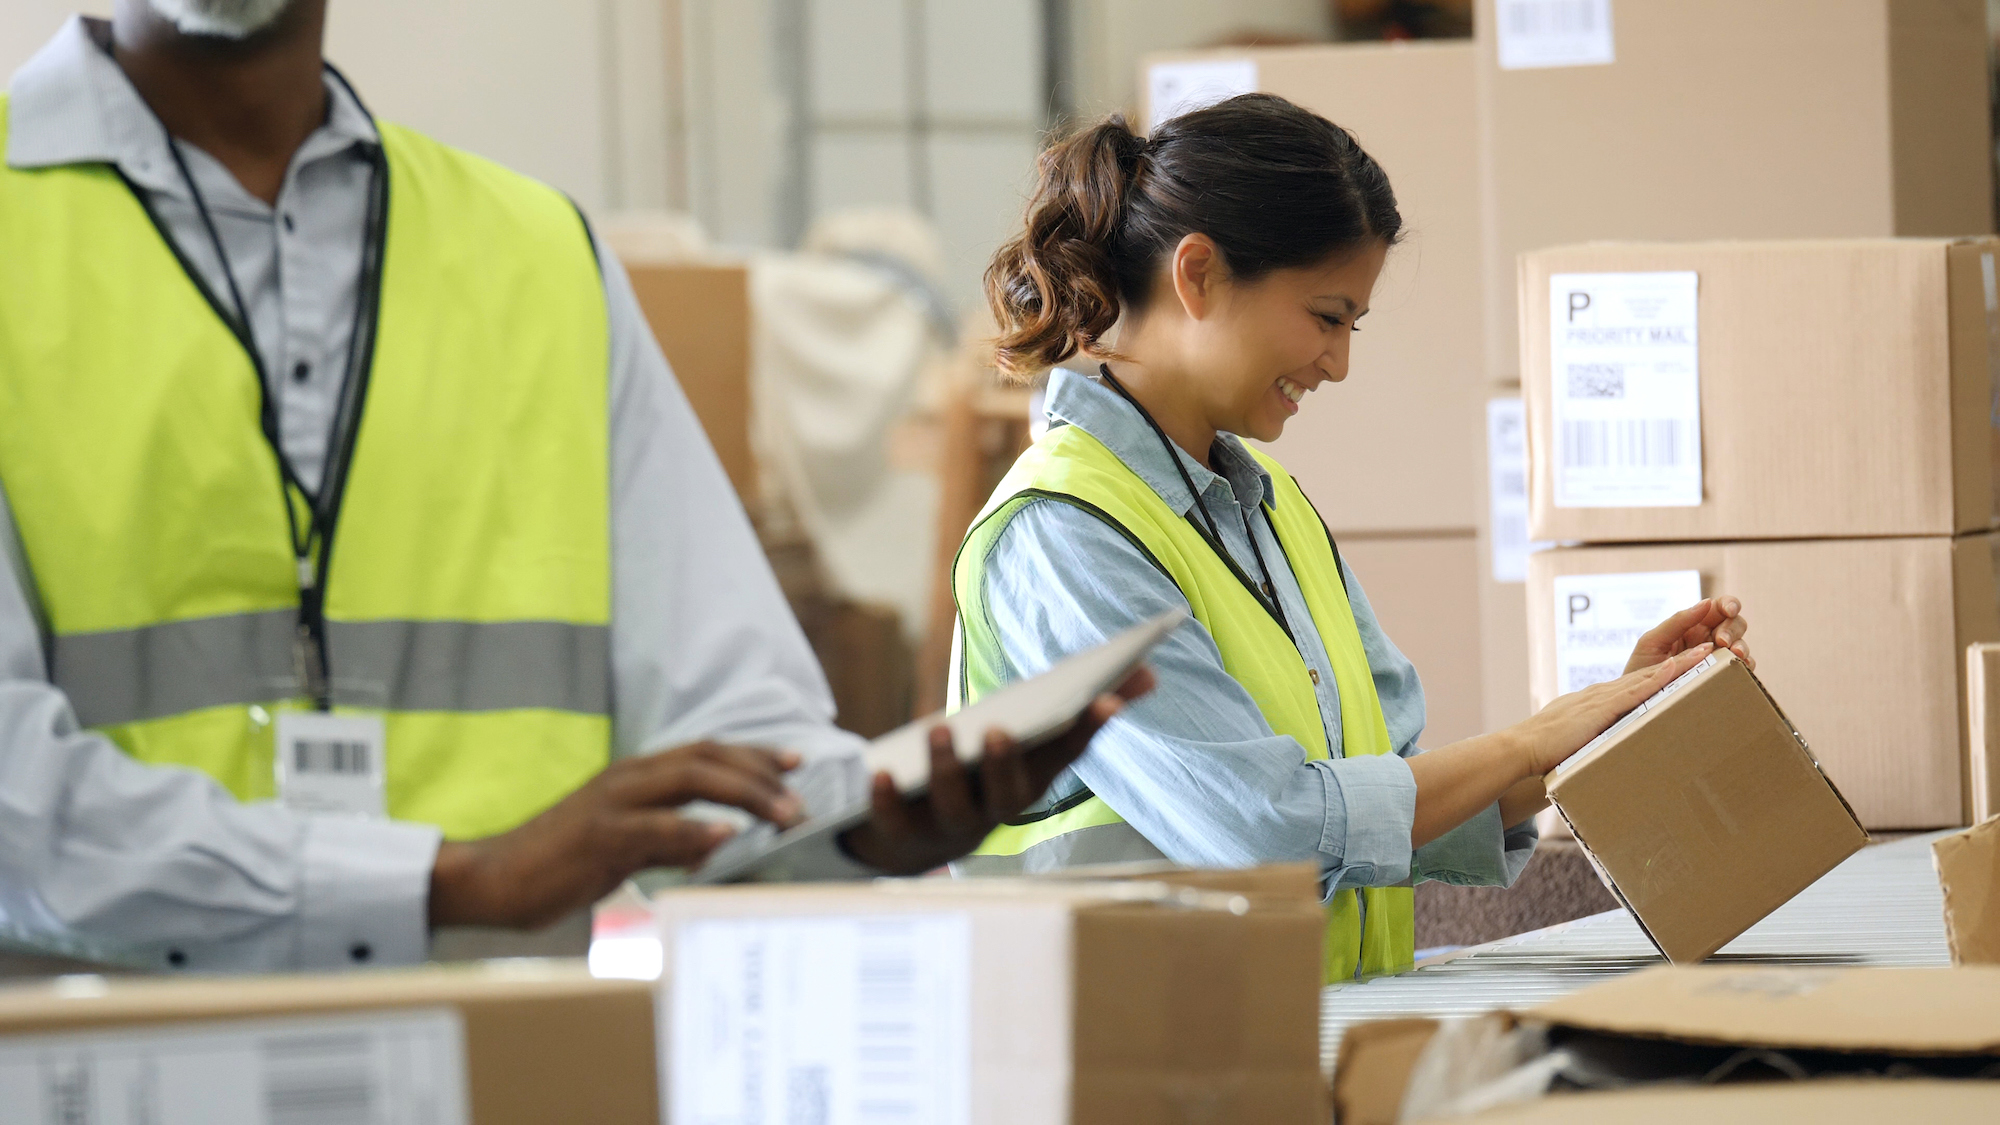 Distribution Warehouse Employees Prepare Packages For Shipment